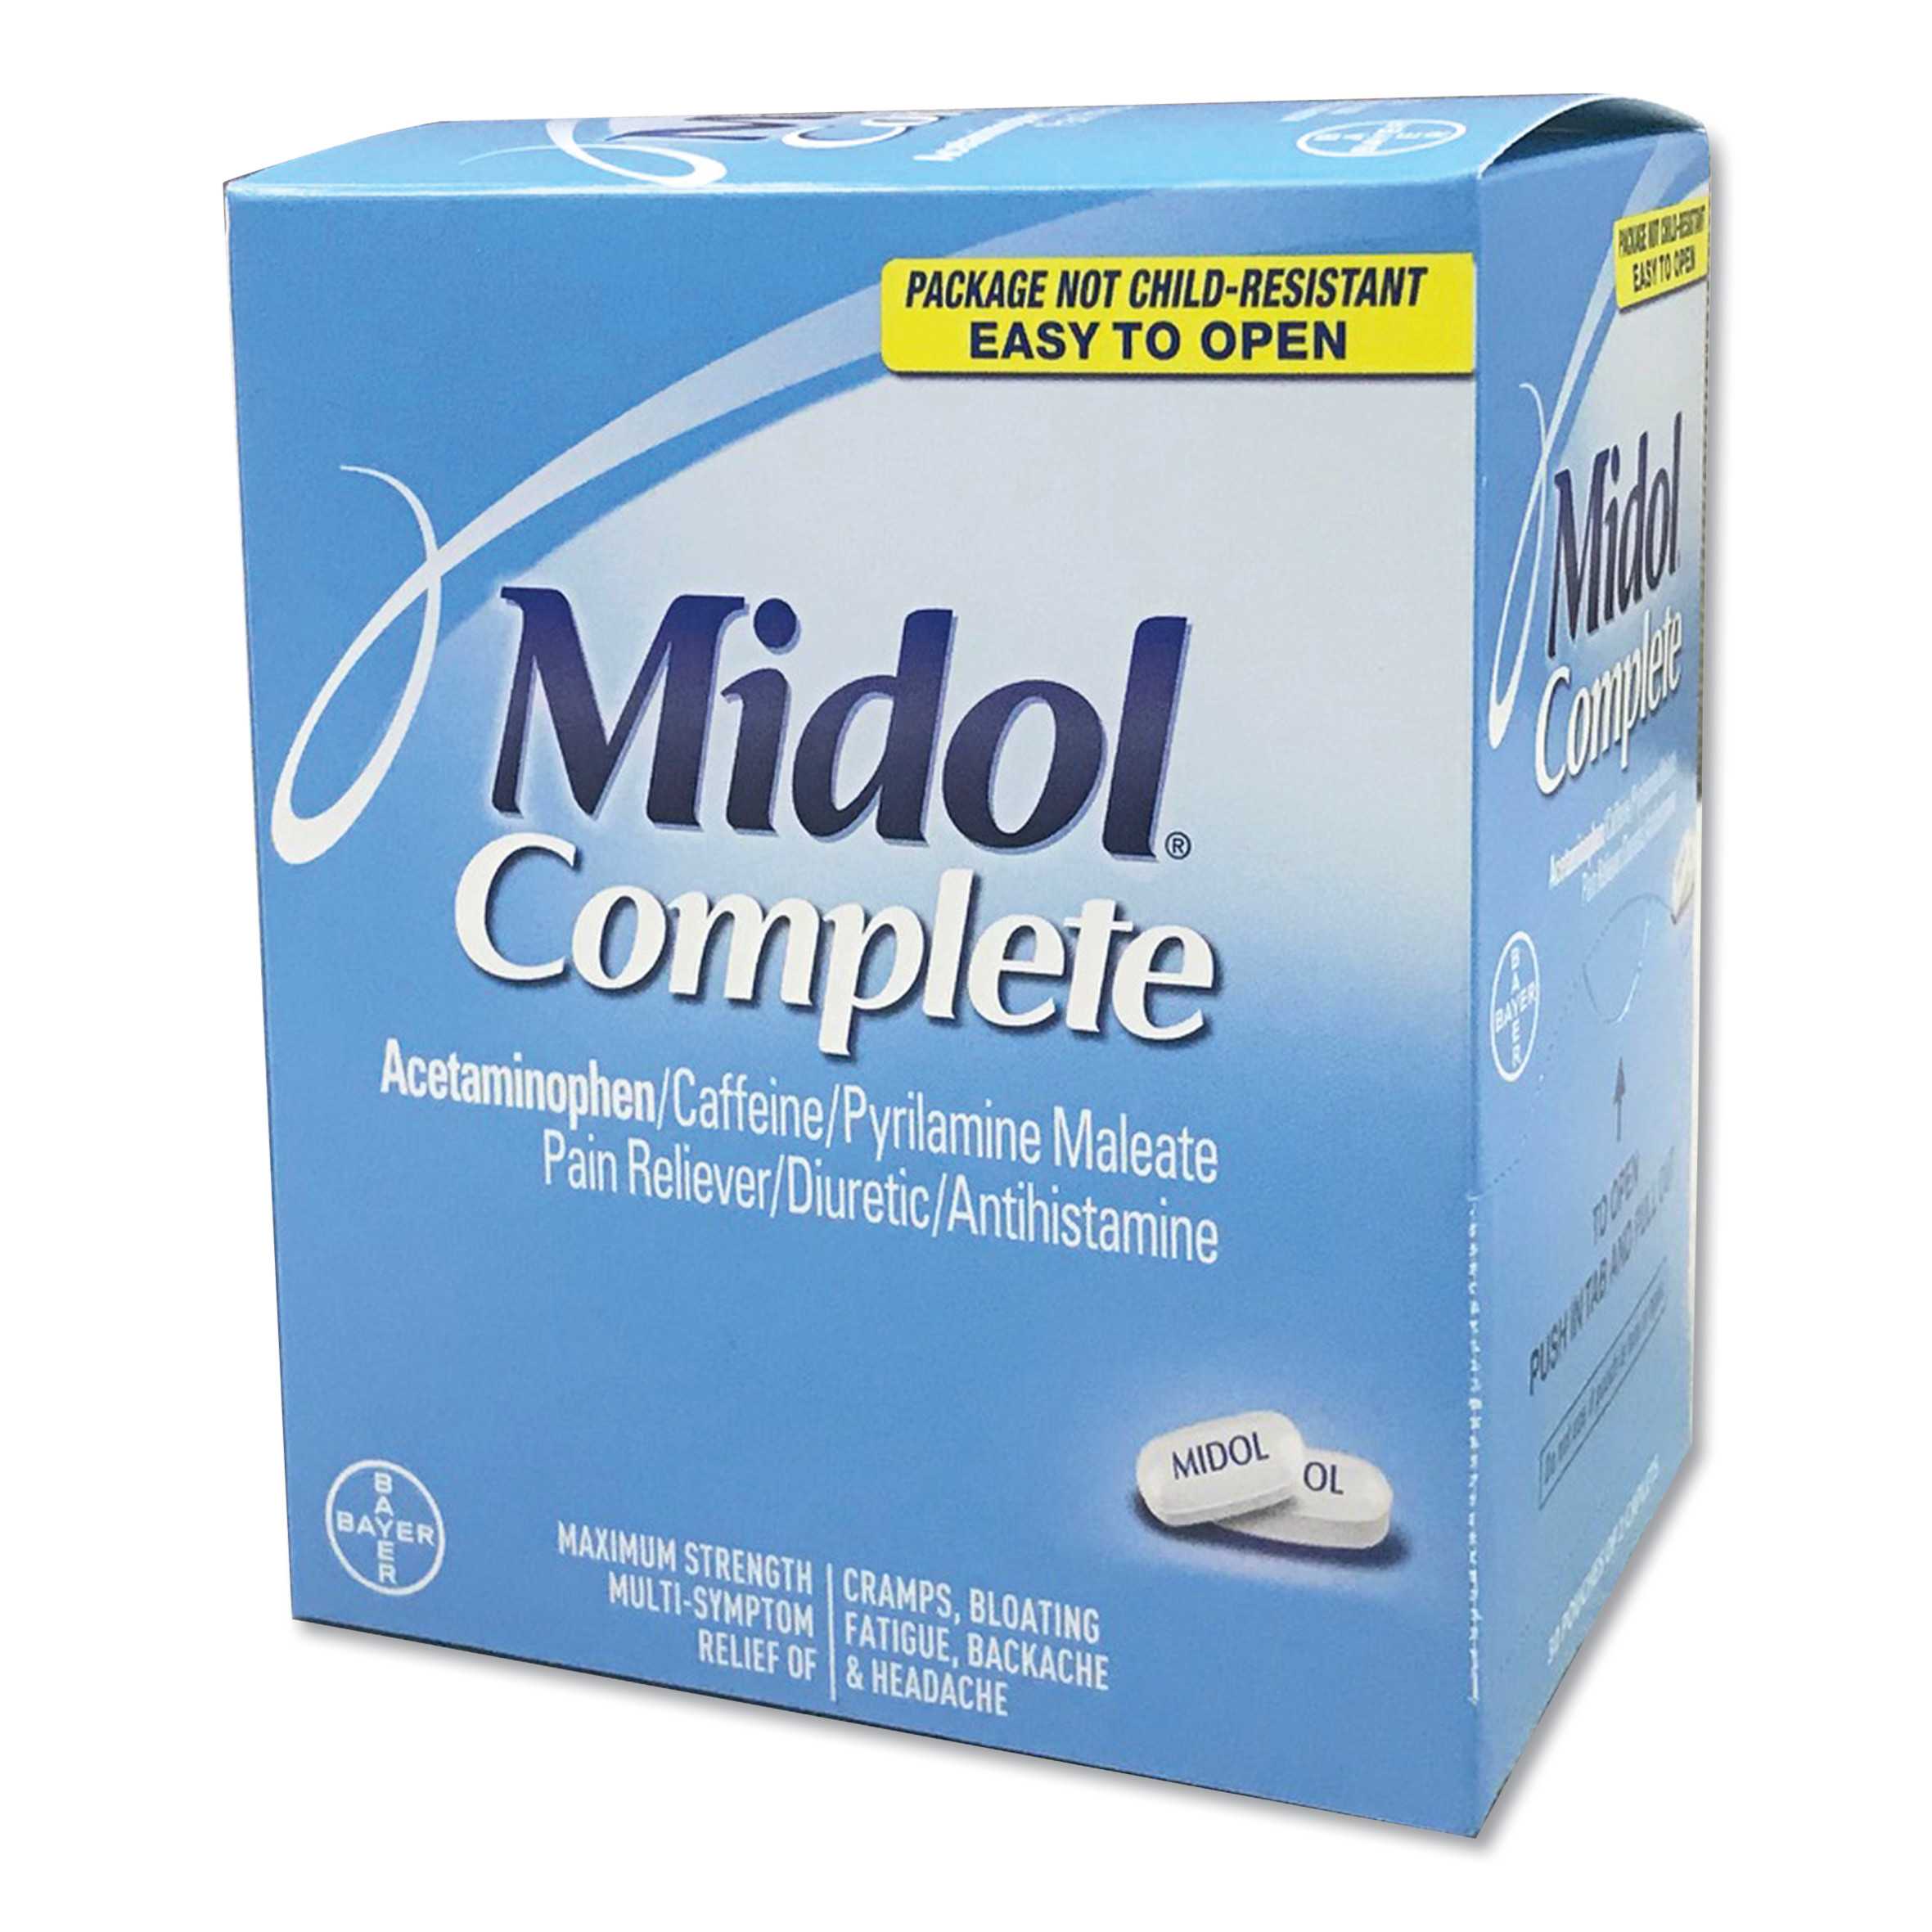  Midol 1841 Complete Menstrual Caplets, Two-Pack, 30 Packs/Box (PFYBXMD30) 